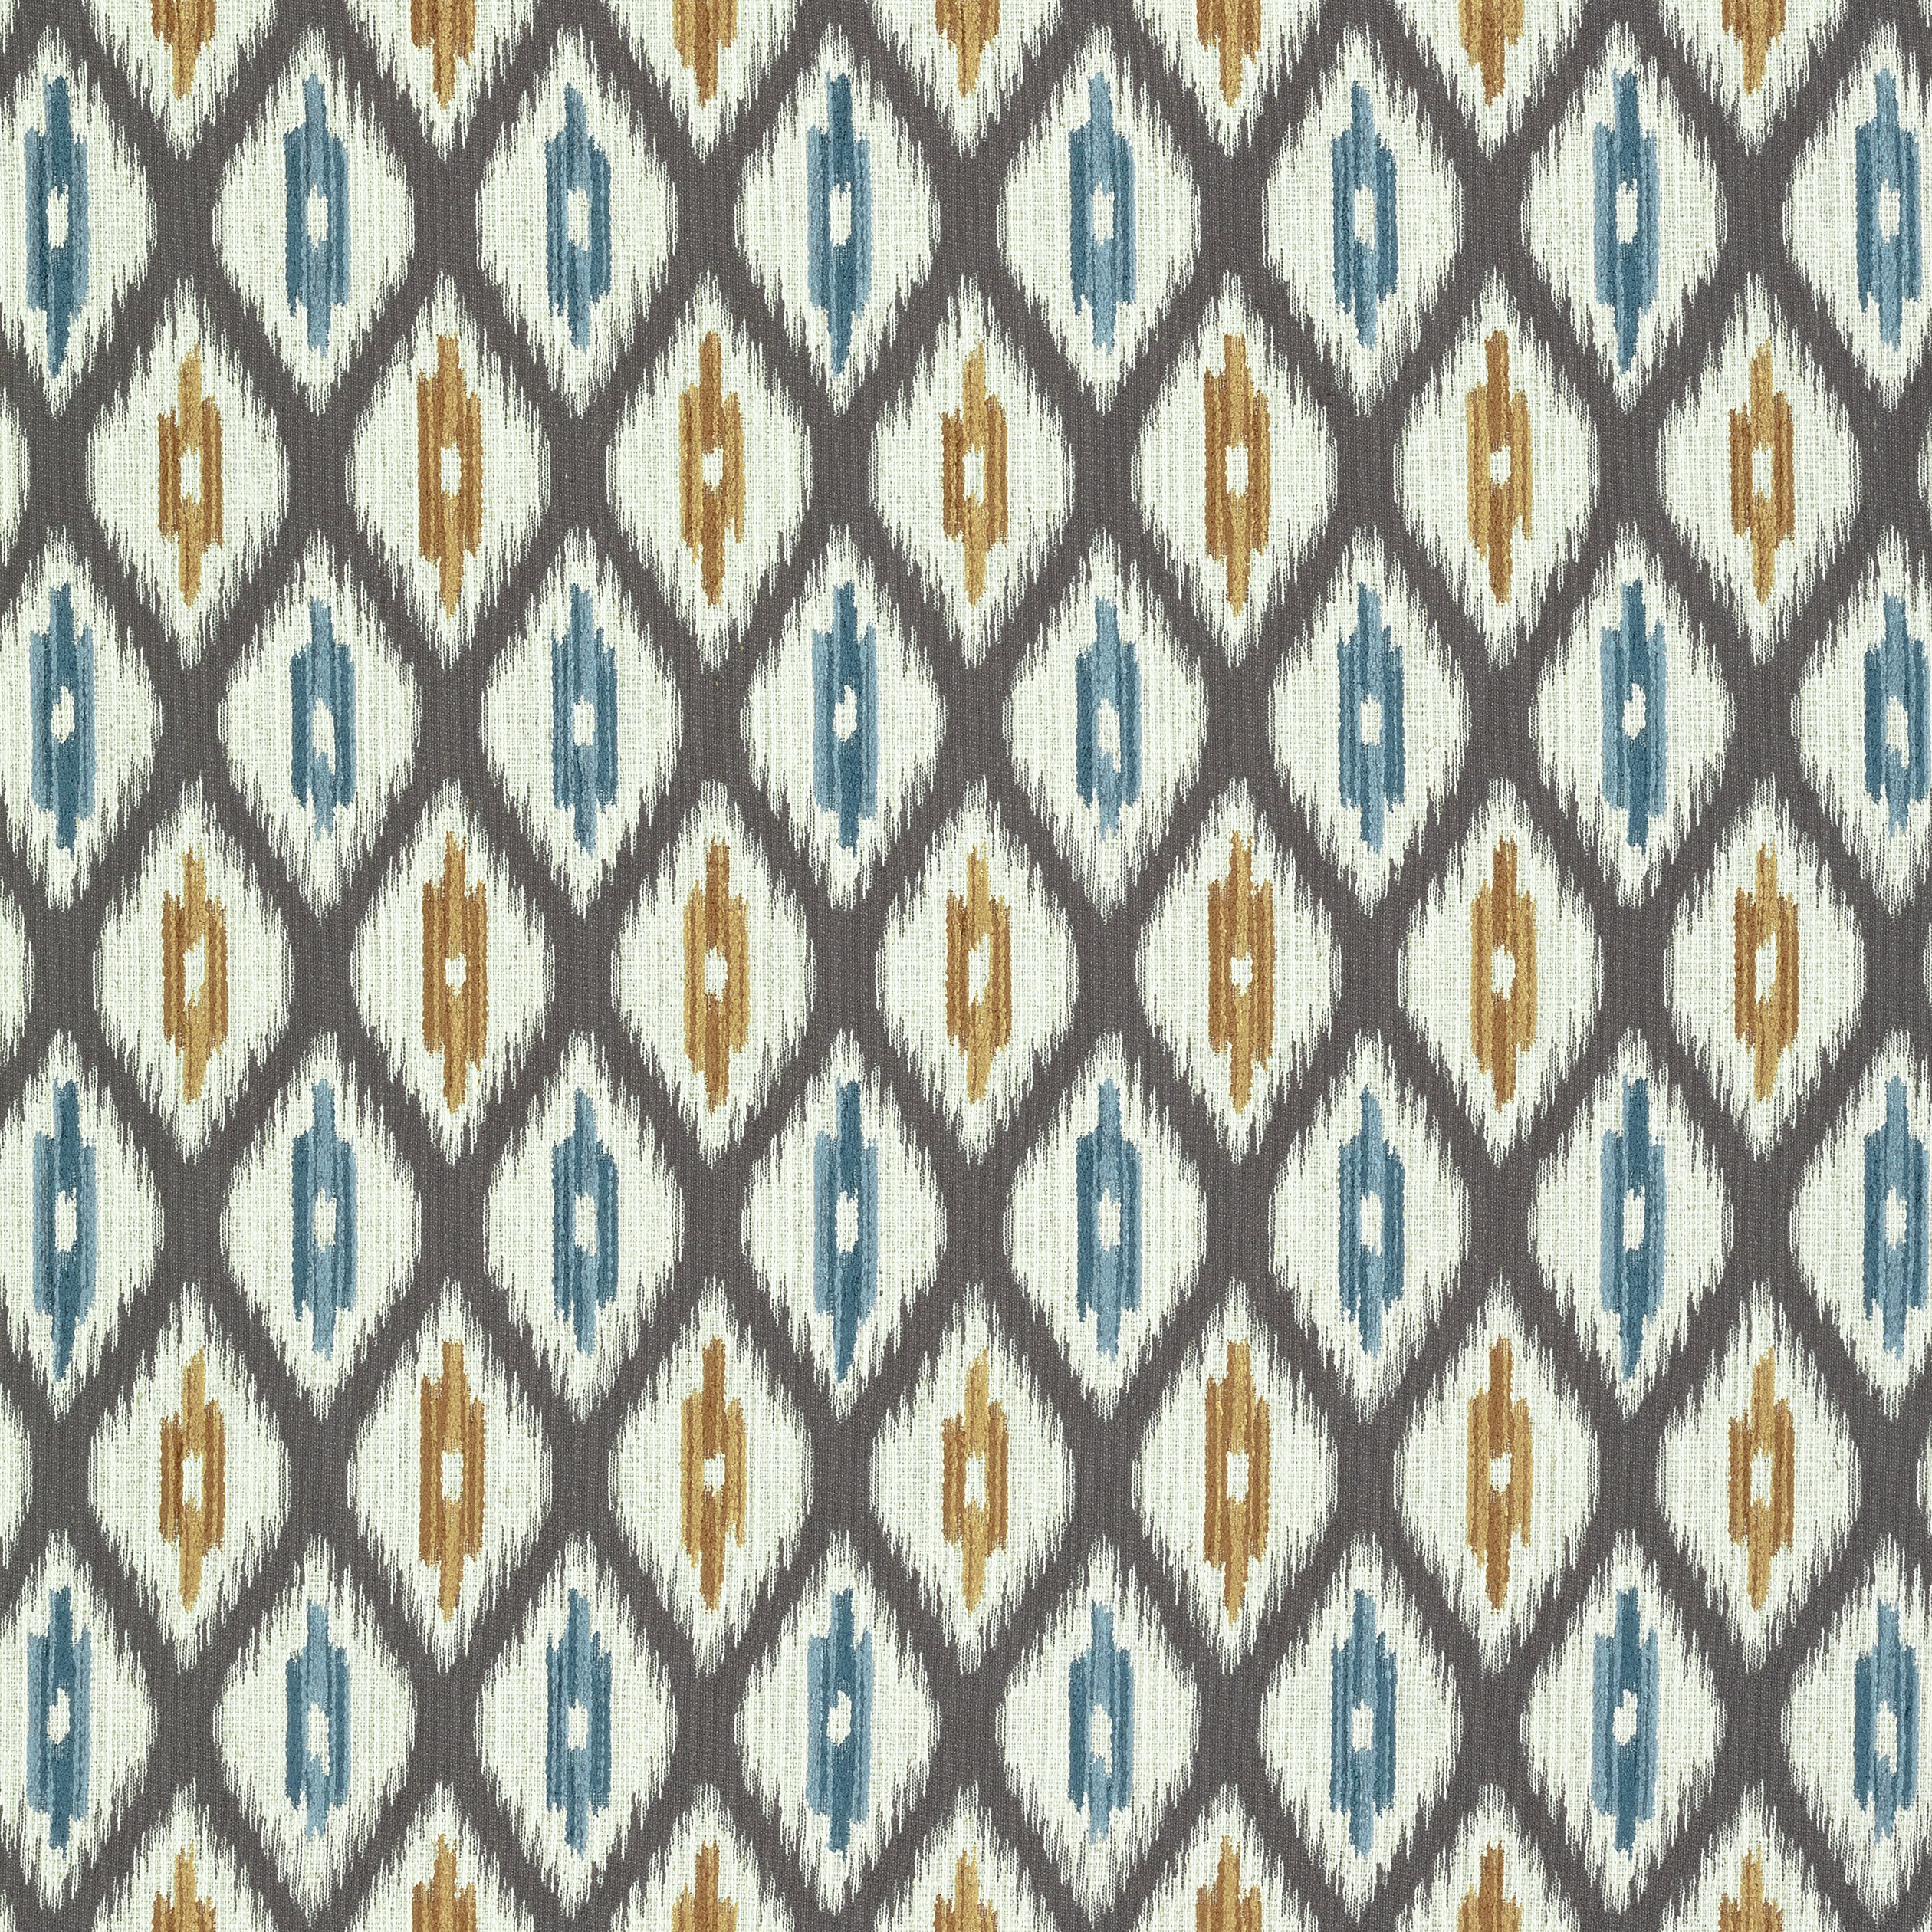 Rajah fabric in charcoal color - pattern number W73364 - by Thibaut in the Nomad collection